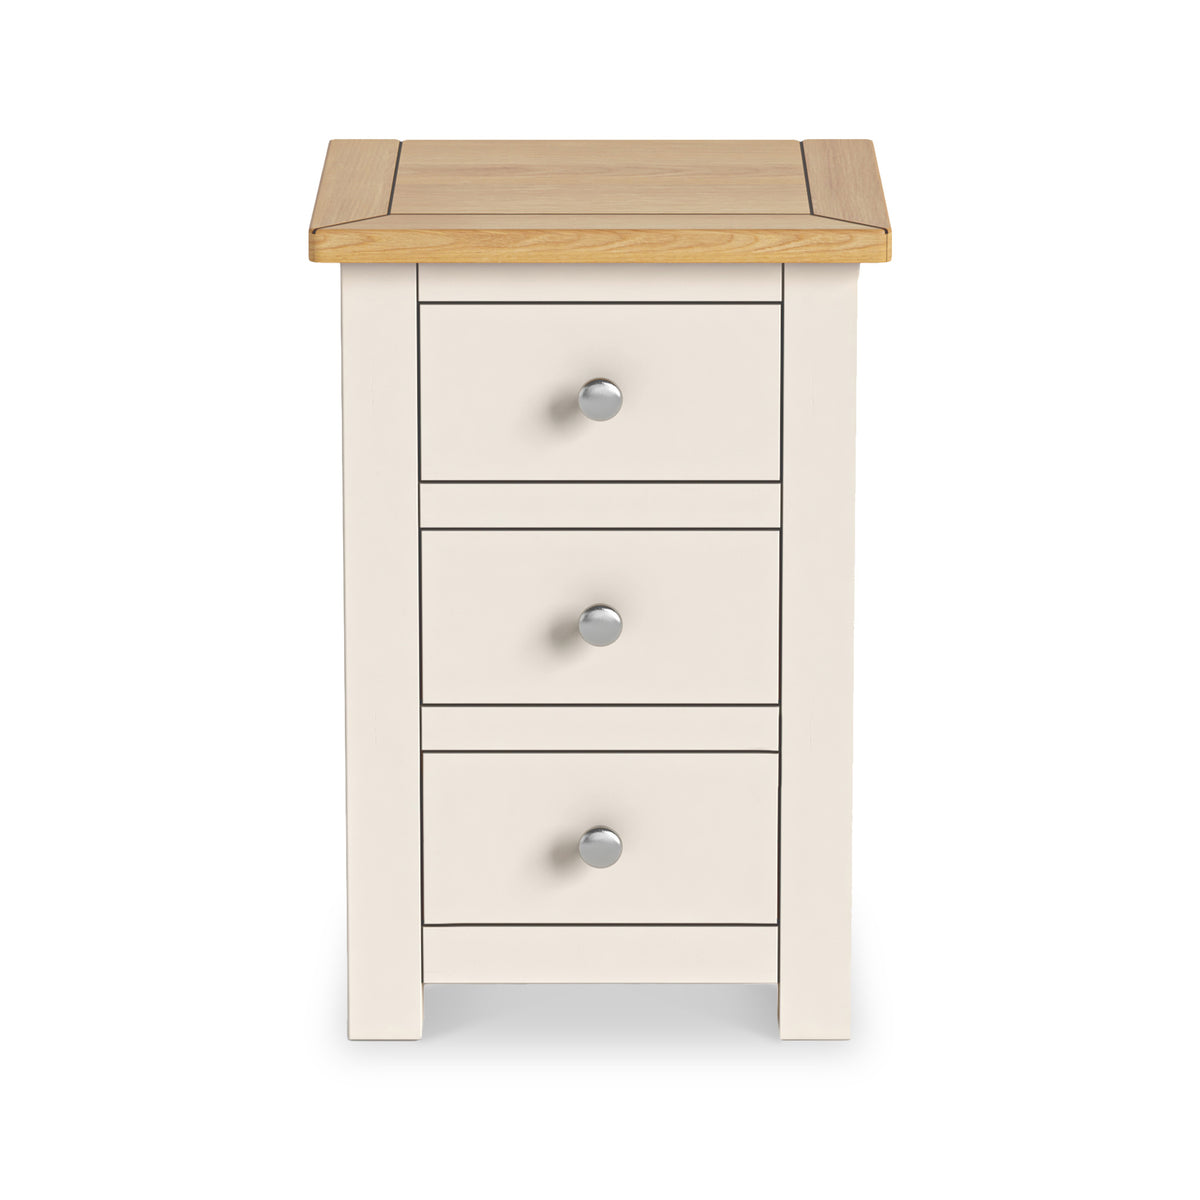 Duchy Line Cream 3 Drawer Bedside Cabinet with Oak Top